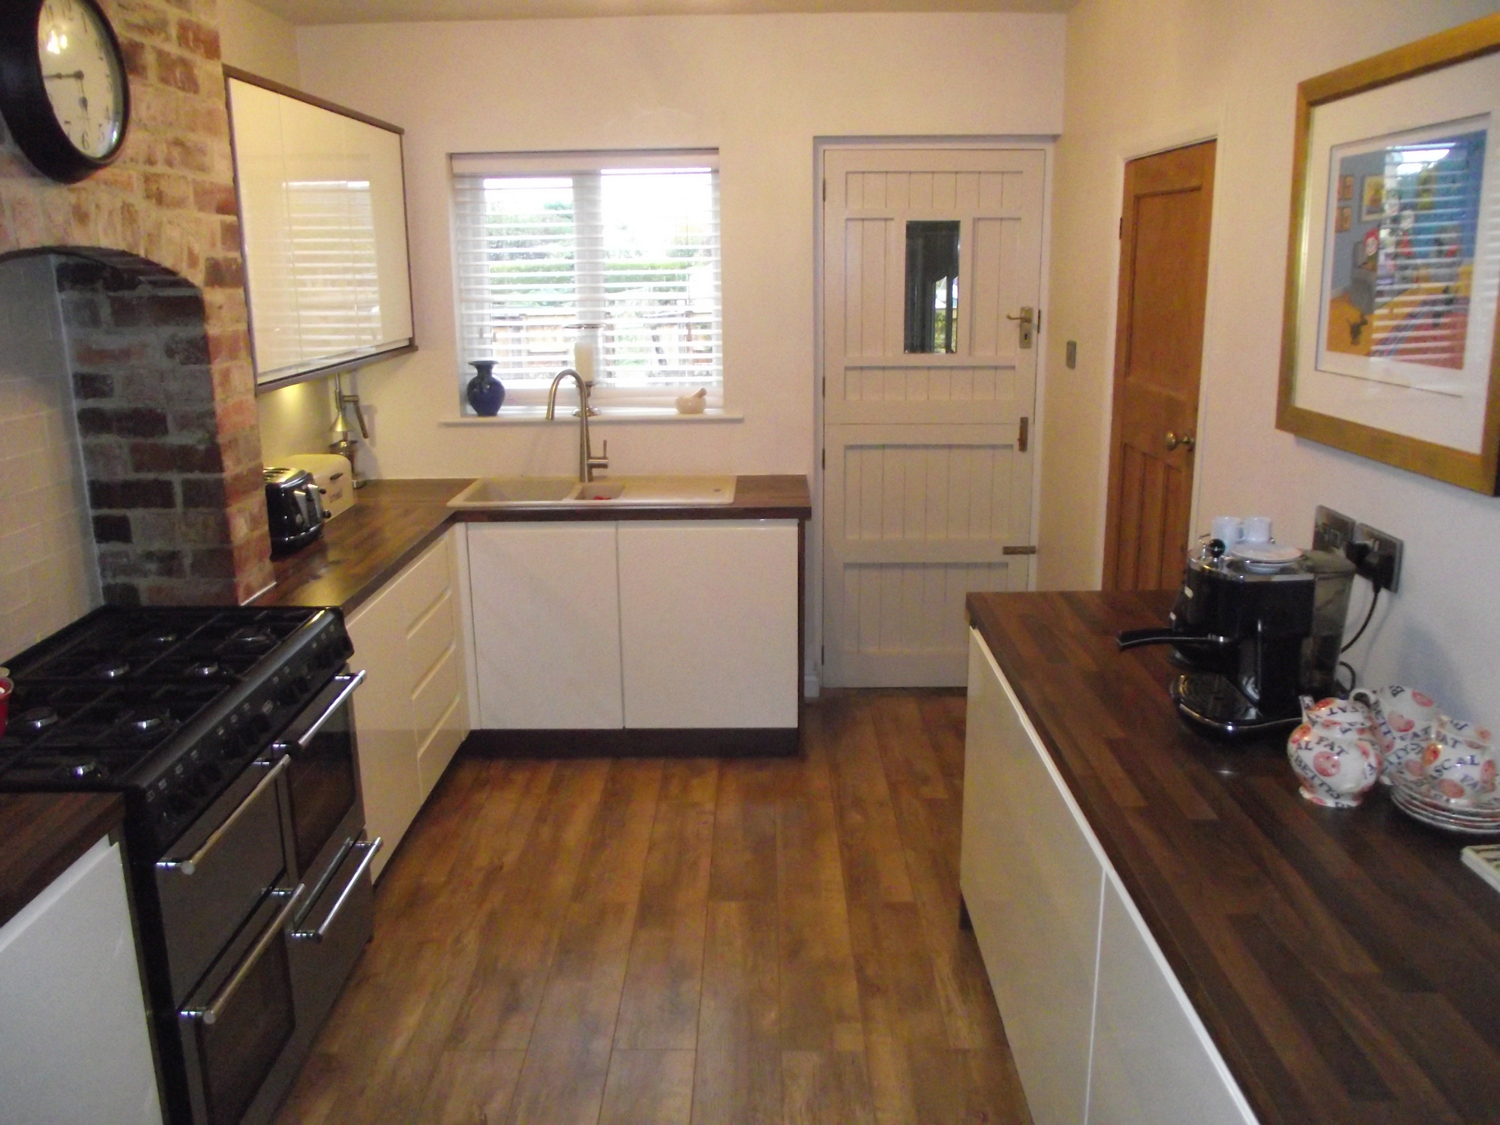 New kitchen doors can transform your kitchens appearance